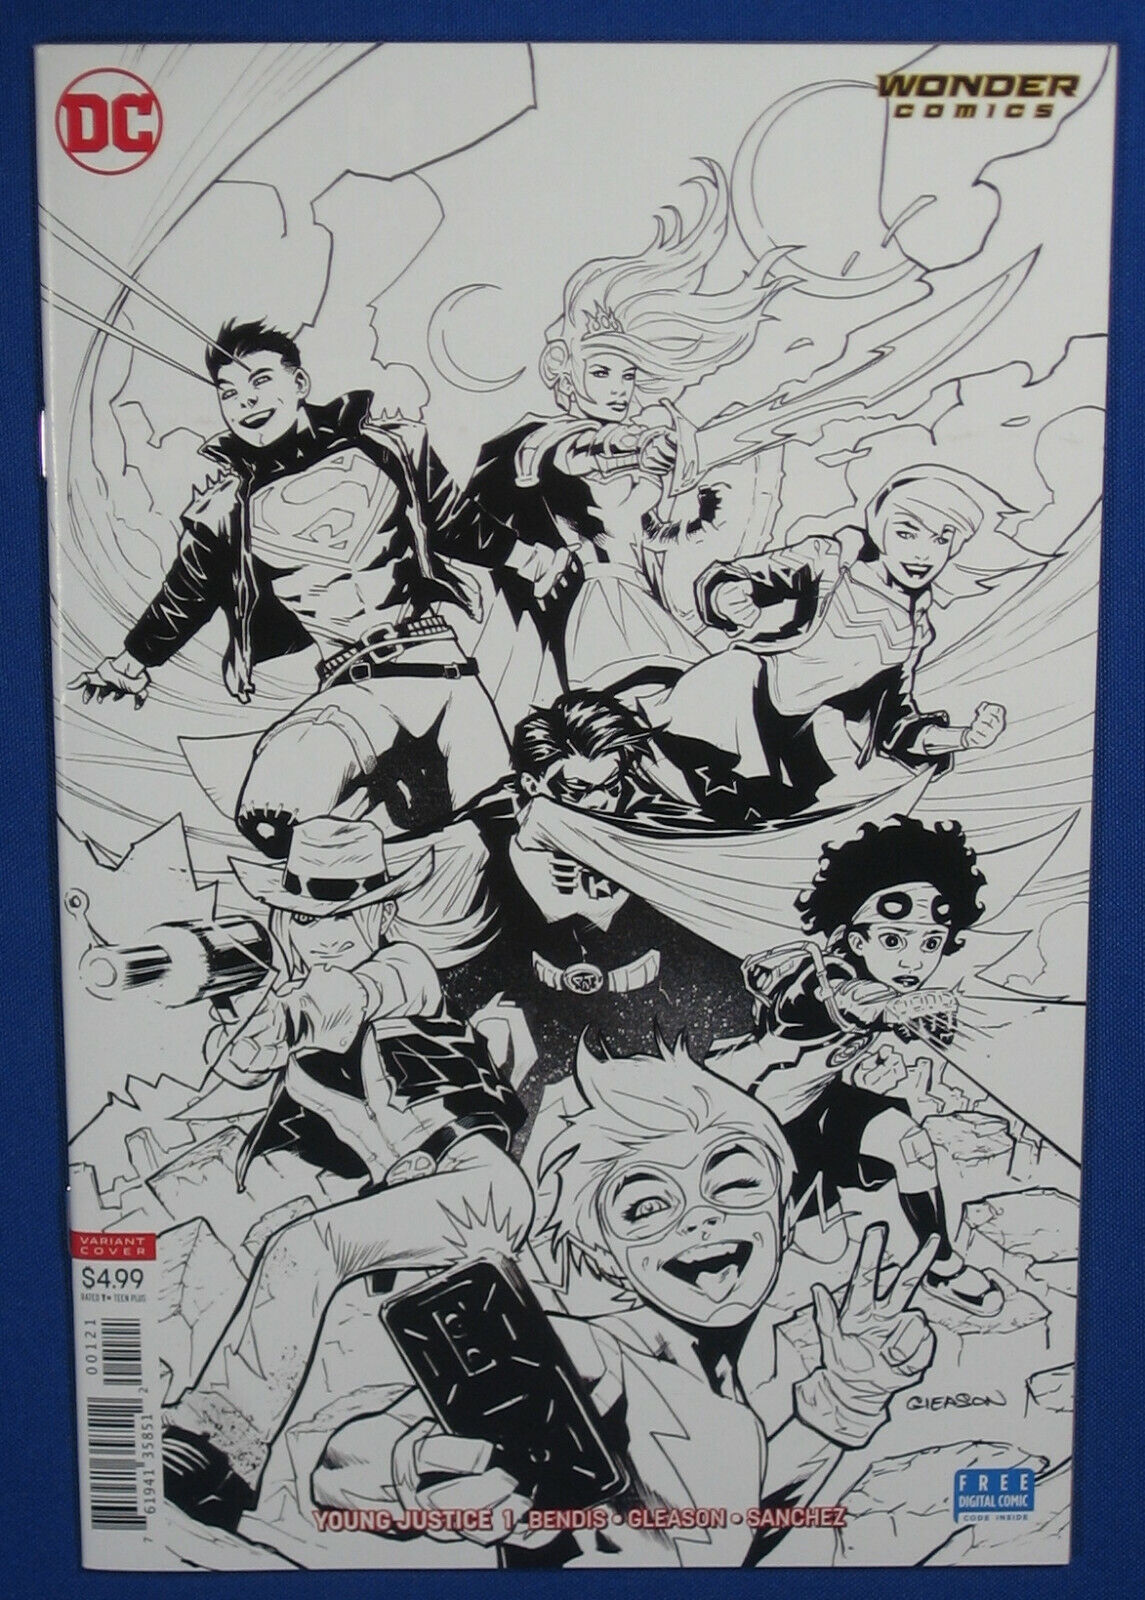 Young Justice #1 Comic Book DC 2019 B&W Sketch Variant Cover Wonder Teen Lantern